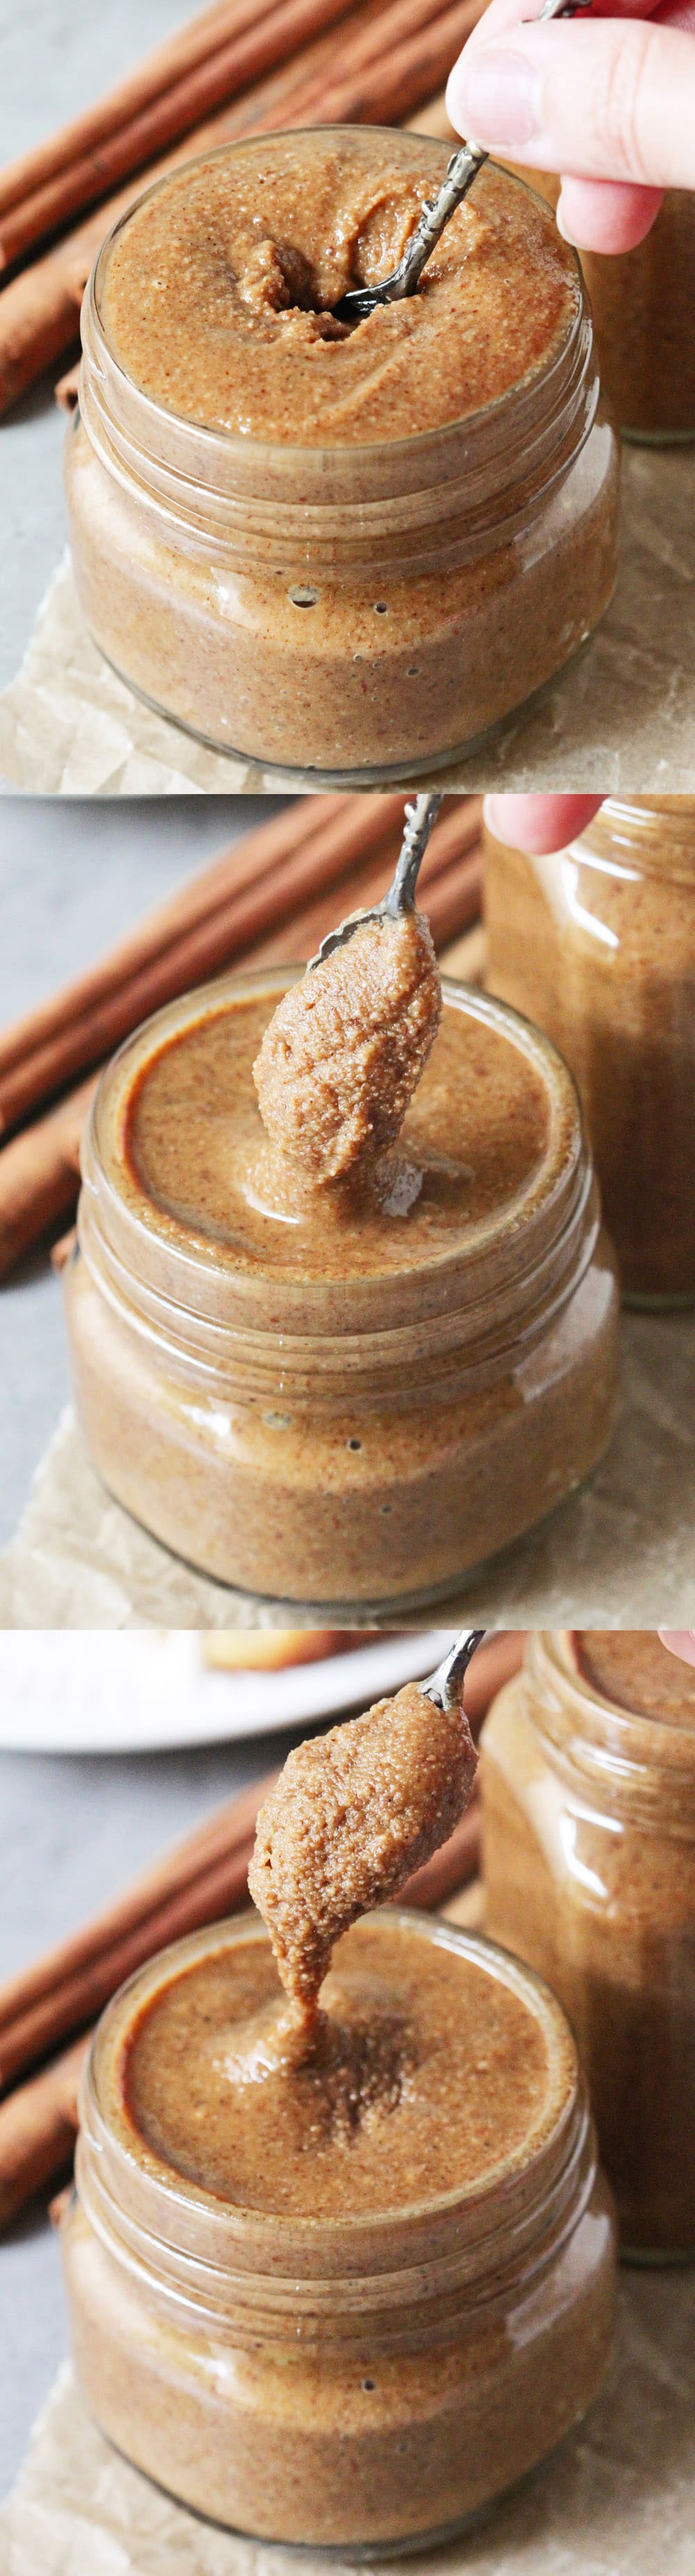 This Healthy Cinnamon Roll Almond Butter has got all the flavor of cinnamon rolls but in a sweet and spreadable form! Perfect on toast, oatmeal, ice cream, parfaits, AND a spoon. Made with toasted almonds, coconut oil, cinnamon, molasses, and stevia extract -- no butter, no sugar, no artificial ingredients. Best of all, it's refined sugar free, gluten free, and vegan!